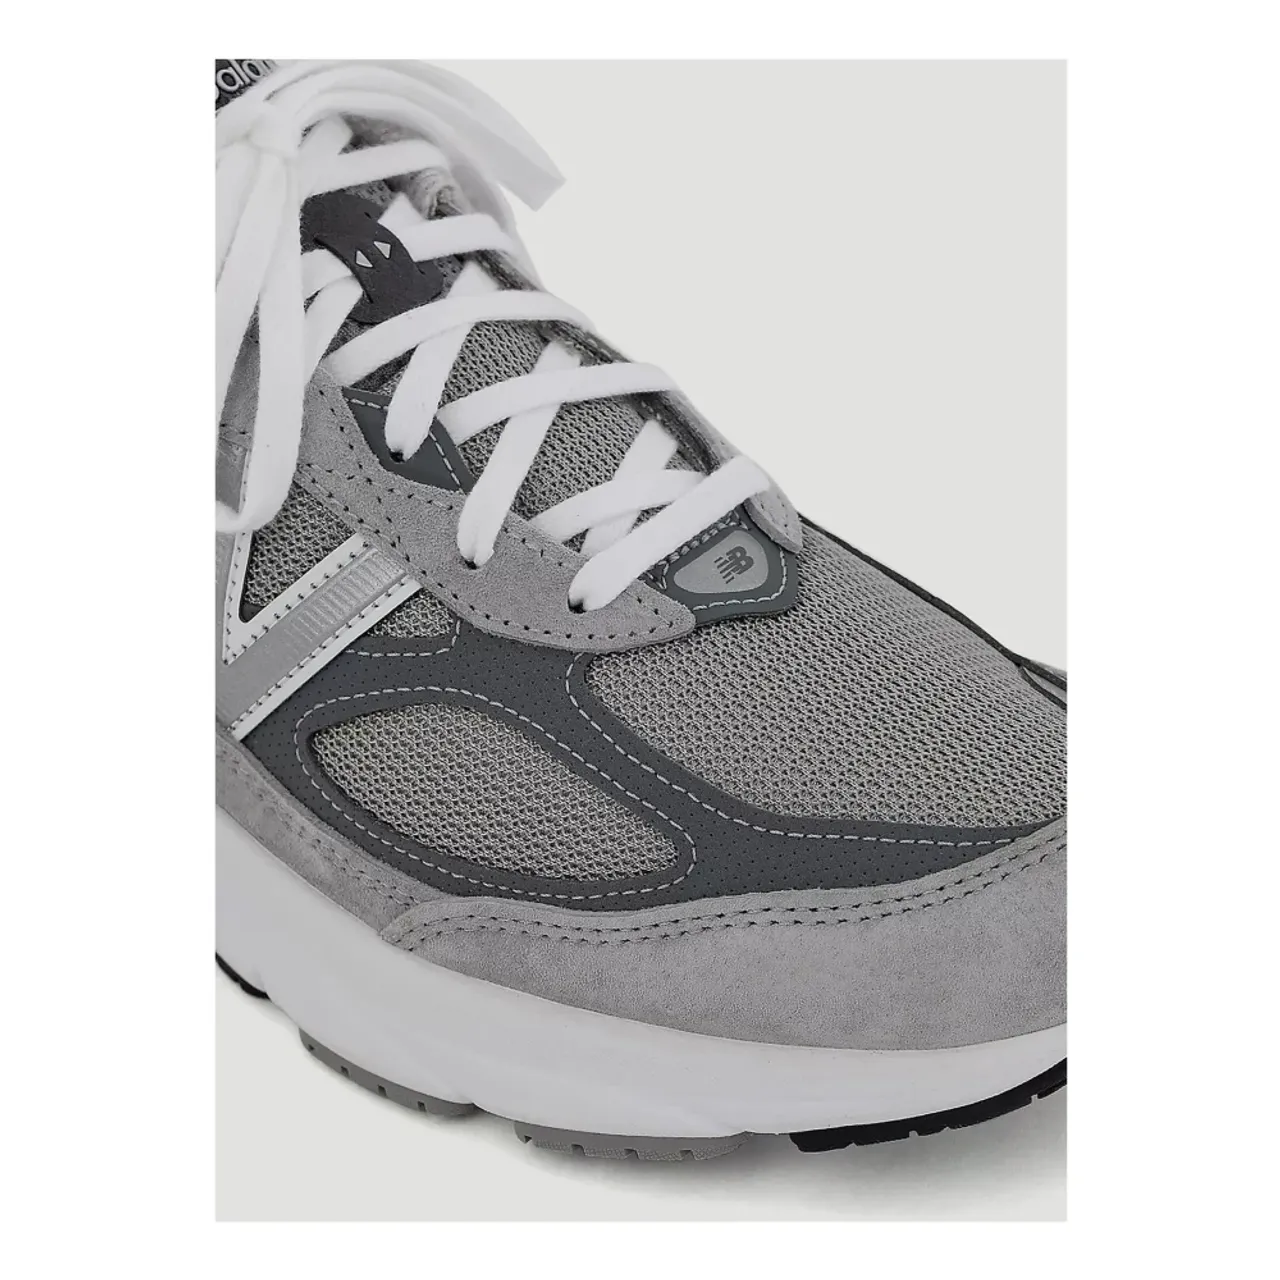 New Balance , Made in USA 990v6 Sneakers ,Gray male, Sizes: